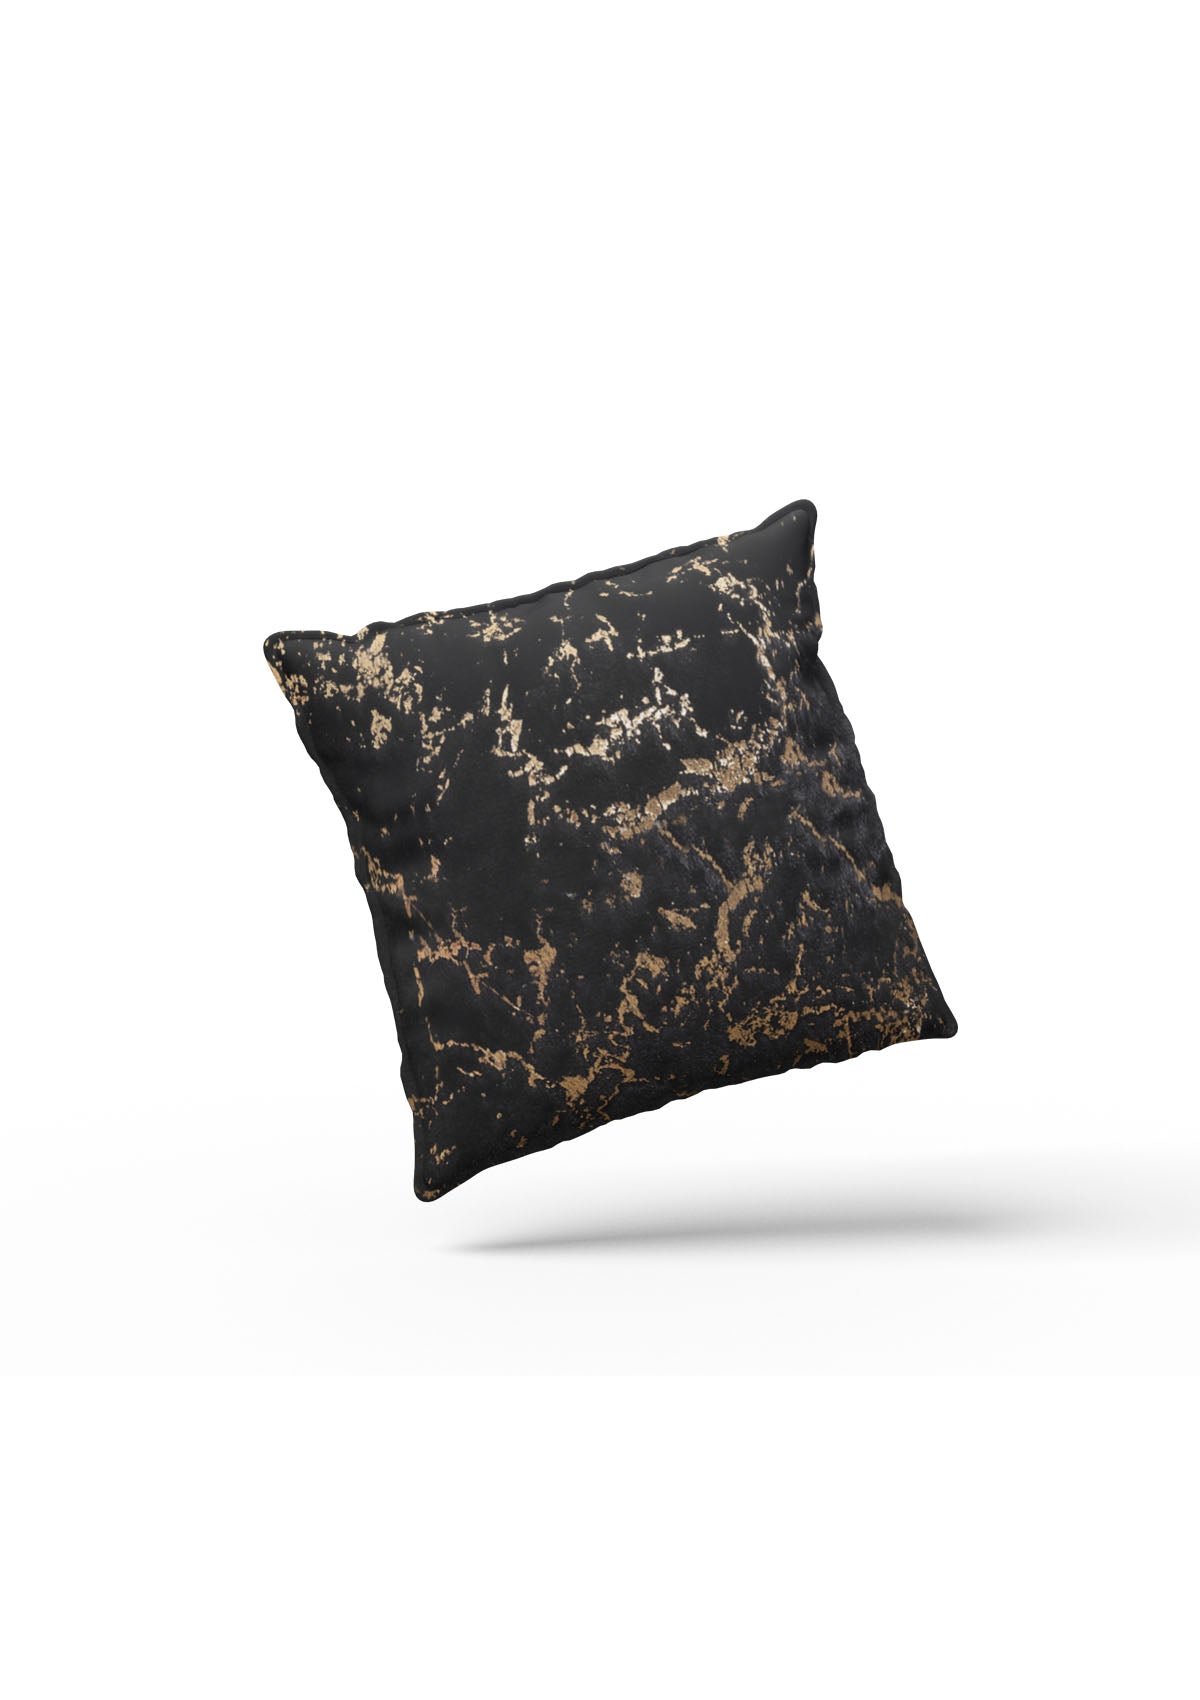 Luxurious black and gold cushion cover with shimmering texture